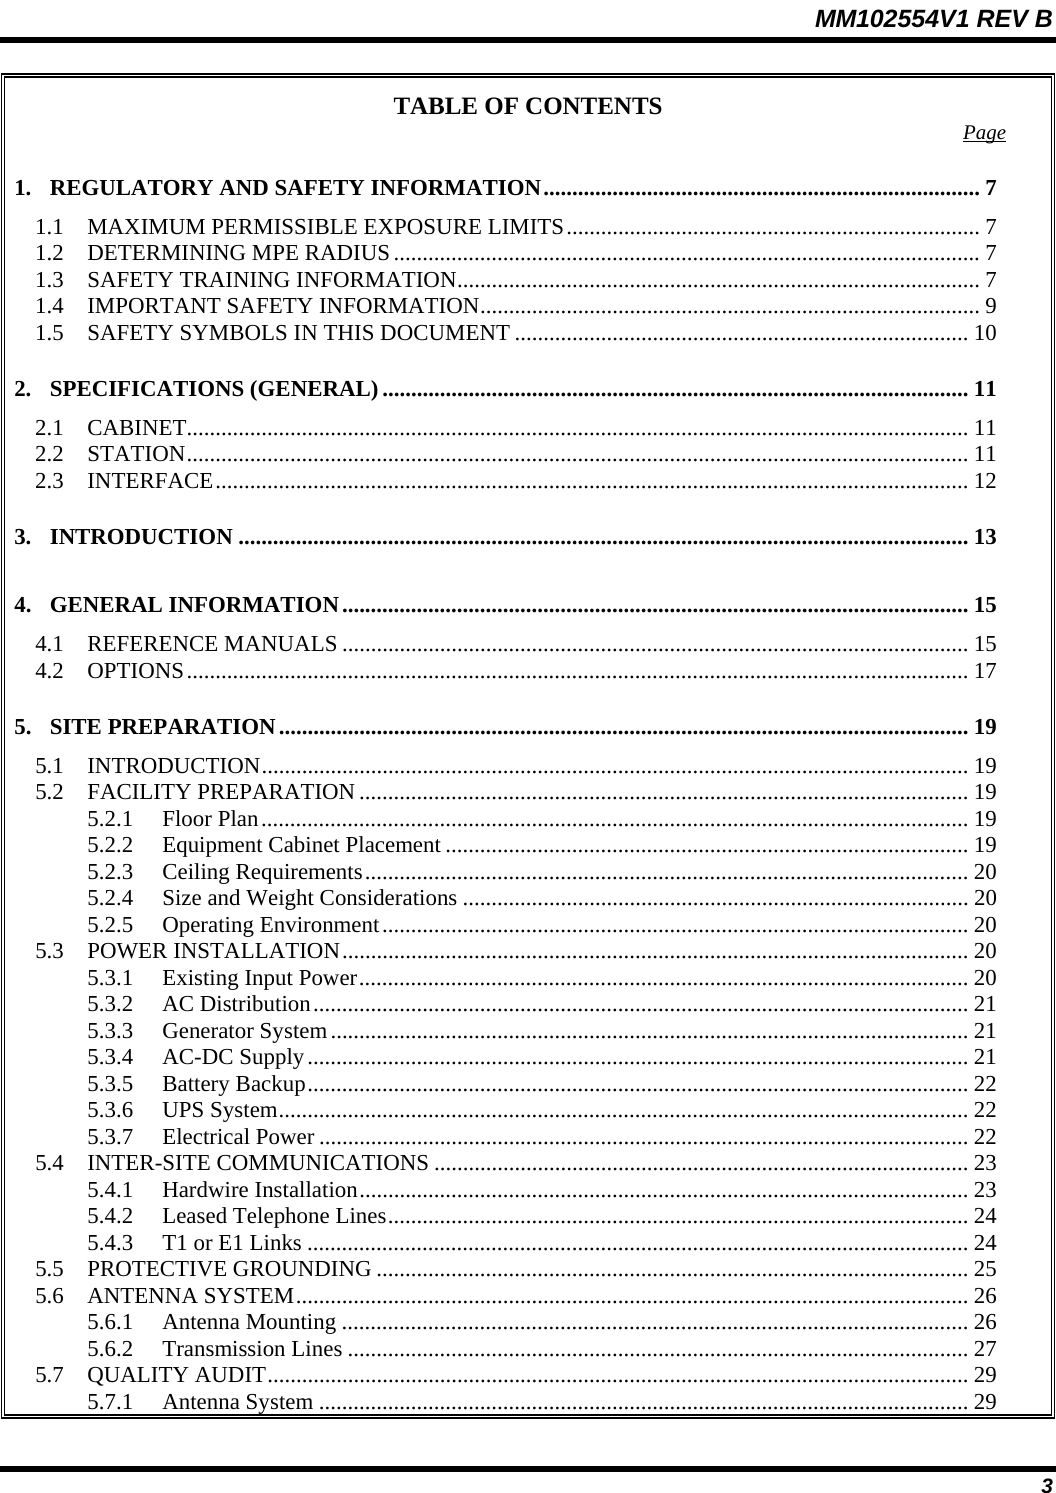 MM102554V1 REV B  3 TABLE OF CONTENTS  Page 1. REGULATORY AND SAFETY INFORMATION............................................................................ 7 1.1  MAXIMUM PERMISSIBLE EXPOSURE LIMITS........................................................................ 7 1.2 DETERMINING MPE RADIUS ......................................................................................................7 1.3  SAFETY TRAINING INFORMATION........................................................................................... 7 1.4  IMPORTANT SAFETY INFORMATION....................................................................................... 9 1.5  SAFETY SYMBOLS IN THIS DOCUMENT ............................................................................... 10 2. SPECIFICATIONS (GENERAL) ...................................................................................................... 11 2.1 CABINET........................................................................................................................................ 11 2.2 STATION........................................................................................................................................ 11 2.3 INTERFACE................................................................................................................................... 12 3. INTRODUCTION ............................................................................................................................... 13 4. GENERAL INFORMATION............................................................................................................. 15 4.1 REFERENCE MANUALS ............................................................................................................. 15 4.2 OPTIONS........................................................................................................................................ 17 5. SITE PREPARATION........................................................................................................................ 19 5.1 INTRODUCTION........................................................................................................................... 19 5.2 FACILITY PREPARATION .......................................................................................................... 19 5.2.1 Floor Plan........................................................................................................................... 19 5.2.2  Equipment Cabinet Placement ........................................................................................... 19 5.2.3 Ceiling Requirements......................................................................................................... 20 5.2.4  Size and Weight Considerations ........................................................................................ 20 5.2.5 Operating Environment...................................................................................................... 20 5.3 POWER INSTALLATION............................................................................................................. 20 5.3.1  Existing Input Power.......................................................................................................... 20 5.3.2 AC Distribution.................................................................................................................. 21 5.3.3 Generator System............................................................................................................... 21 5.3.4 AC-DC Supply................................................................................................................... 21 5.3.5 Battery Backup................................................................................................................... 22 5.3.6 UPS System........................................................................................................................ 22 5.3.7 Electrical Power ................................................................................................................. 22 5.4 INTER-SITE COMMUNICATIONS ............................................................................................. 23 5.4.1 Hardwire Installation.......................................................................................................... 23 5.4.2  Leased Telephone Lines..................................................................................................... 24 5.4.3  T1 or E1 Links ................................................................................................................... 24 5.5 PROTECTIVE GROUNDING ....................................................................................................... 25 5.6 ANTENNA SYSTEM..................................................................................................................... 26 5.6.1 Antenna Mounting ............................................................................................................. 26 5.6.2 Transmission Lines ............................................................................................................ 27 5.7 QUALITY AUDIT.......................................................................................................................... 29 5.7.1 Antenna System ................................................................................................................. 29 